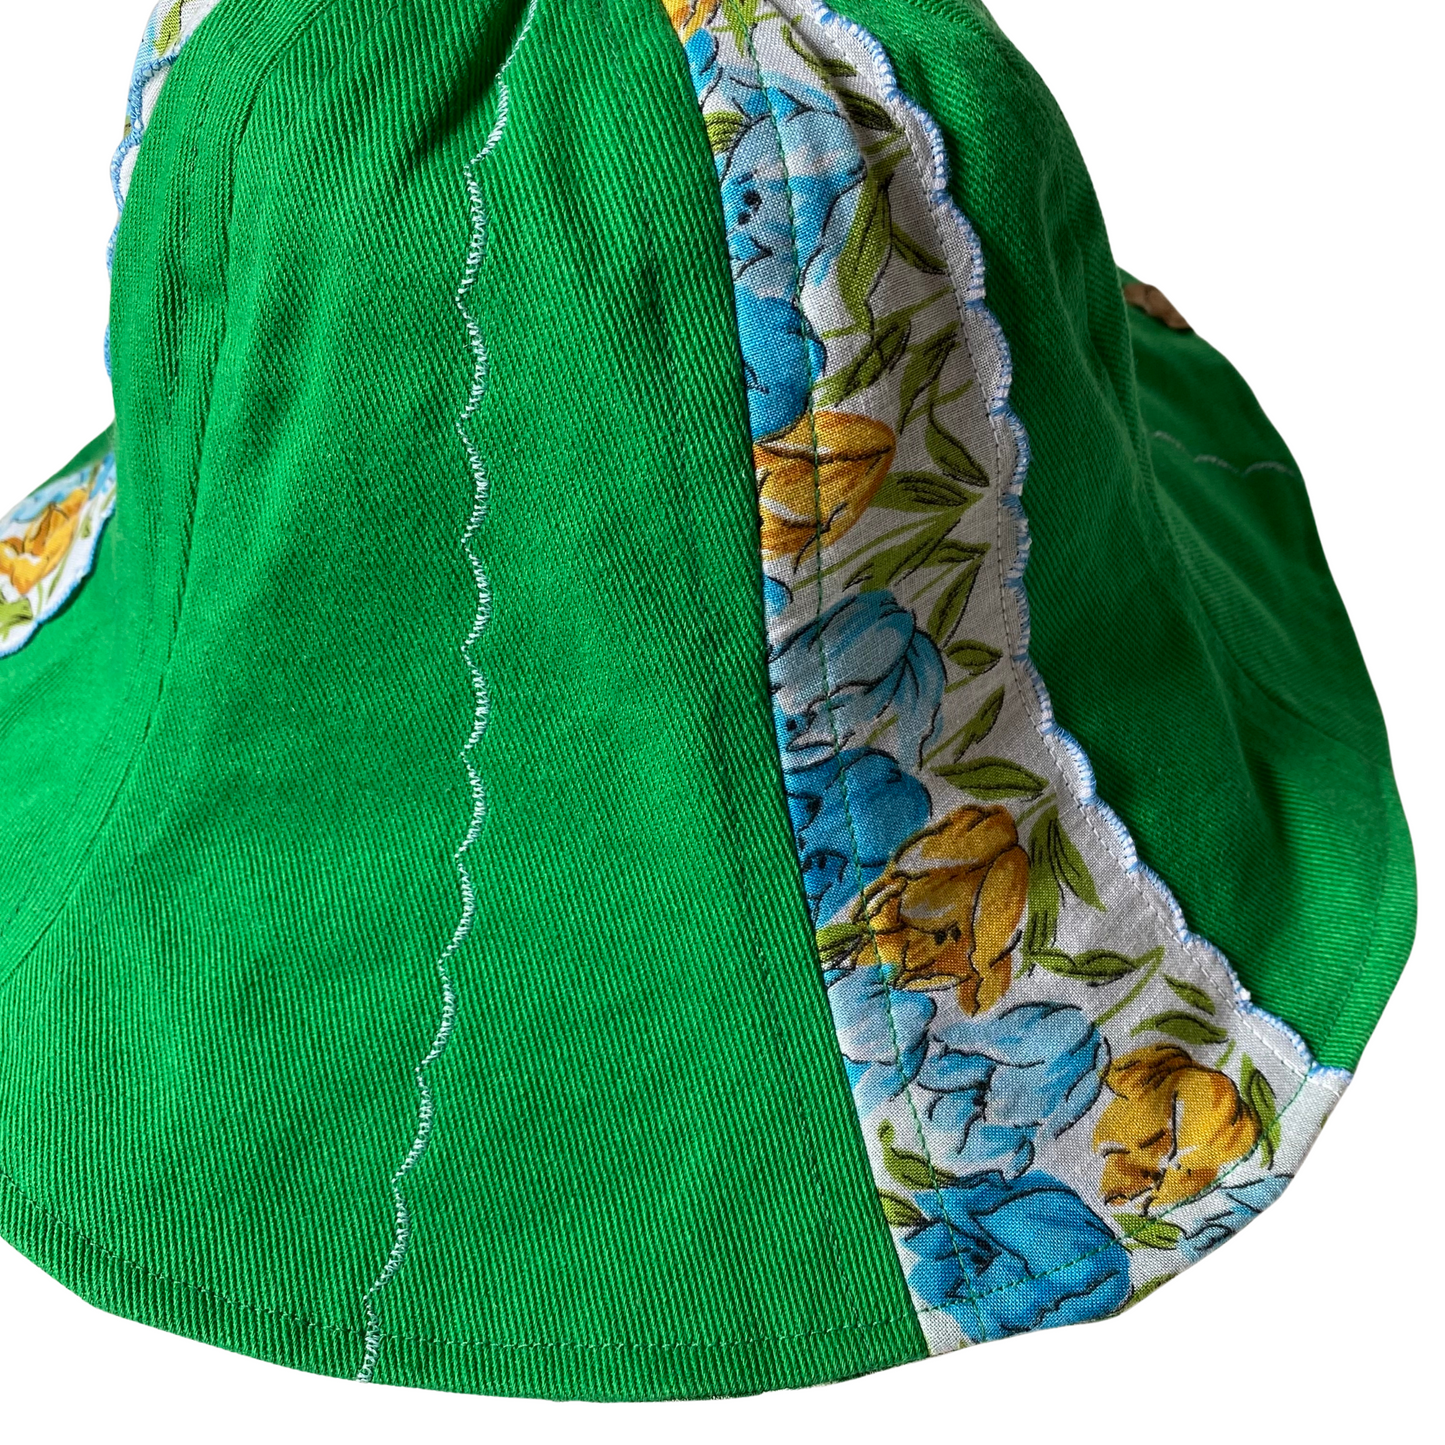 Tulips on a Tulip Hat